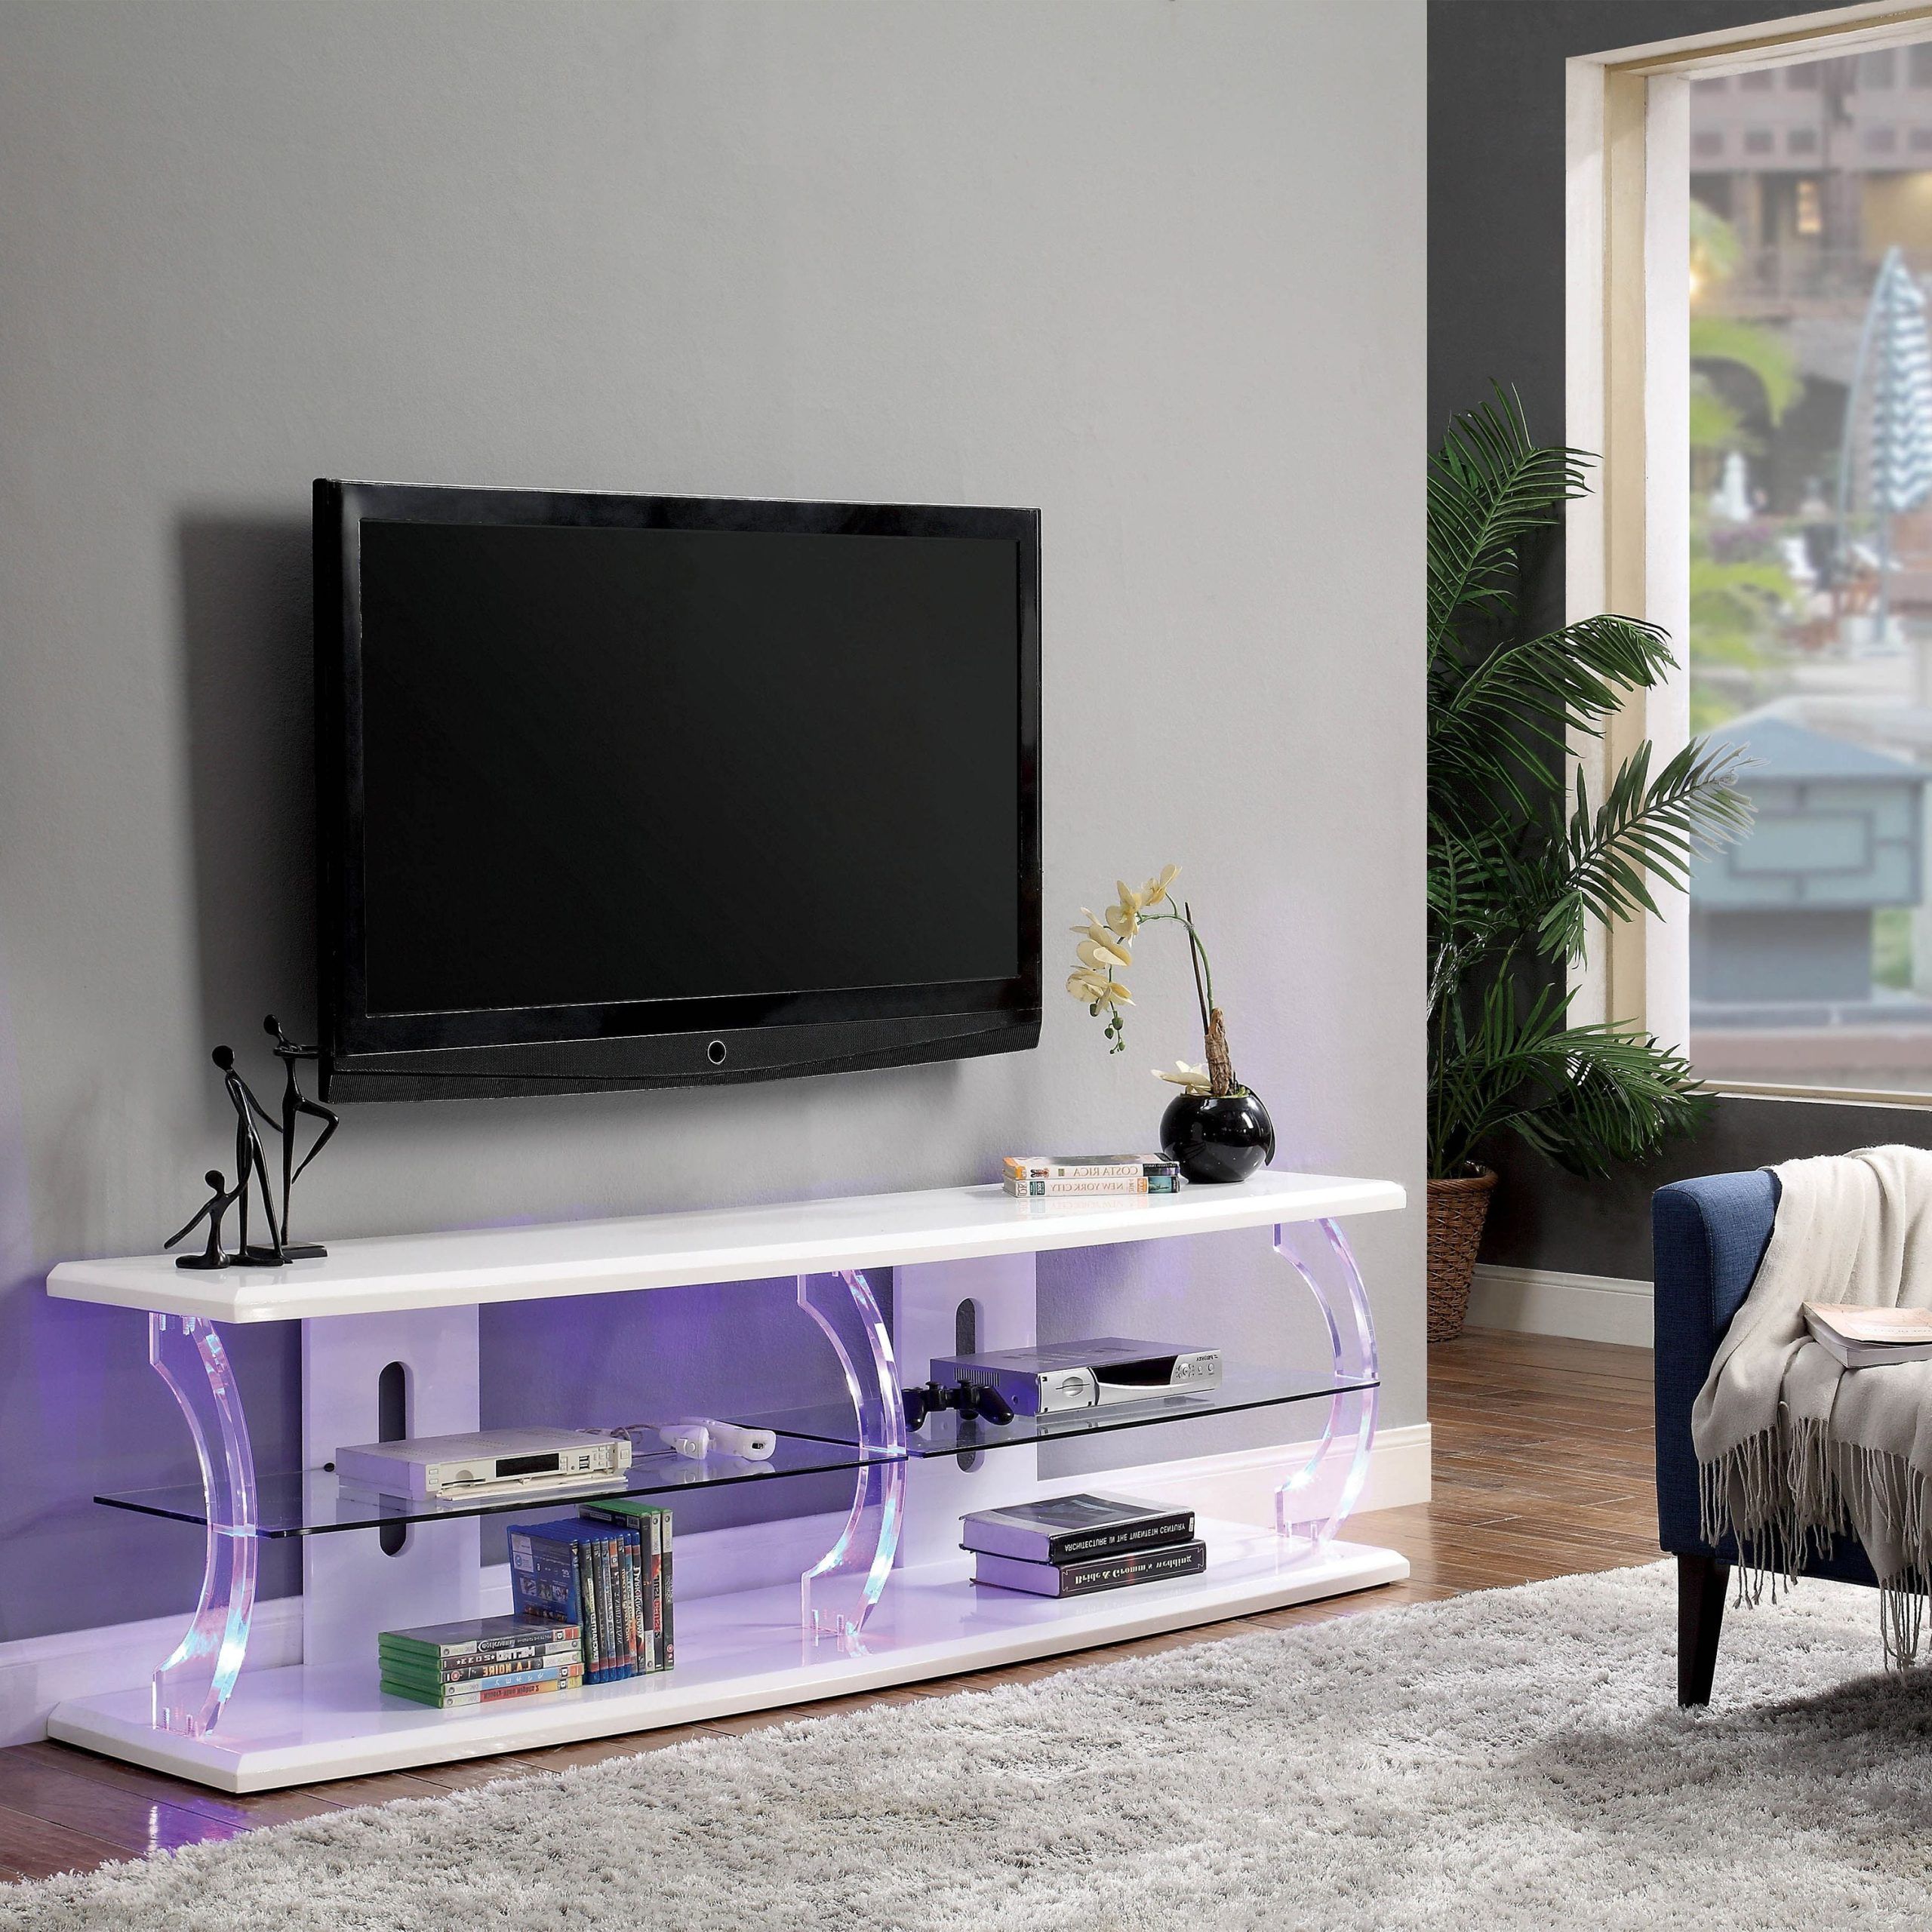 Furniture Of America Vedot Contemporary Led Tv Stand, 72", White And With Regard To Well Known Led Tv Stands With Outlet (View 7 of 15)